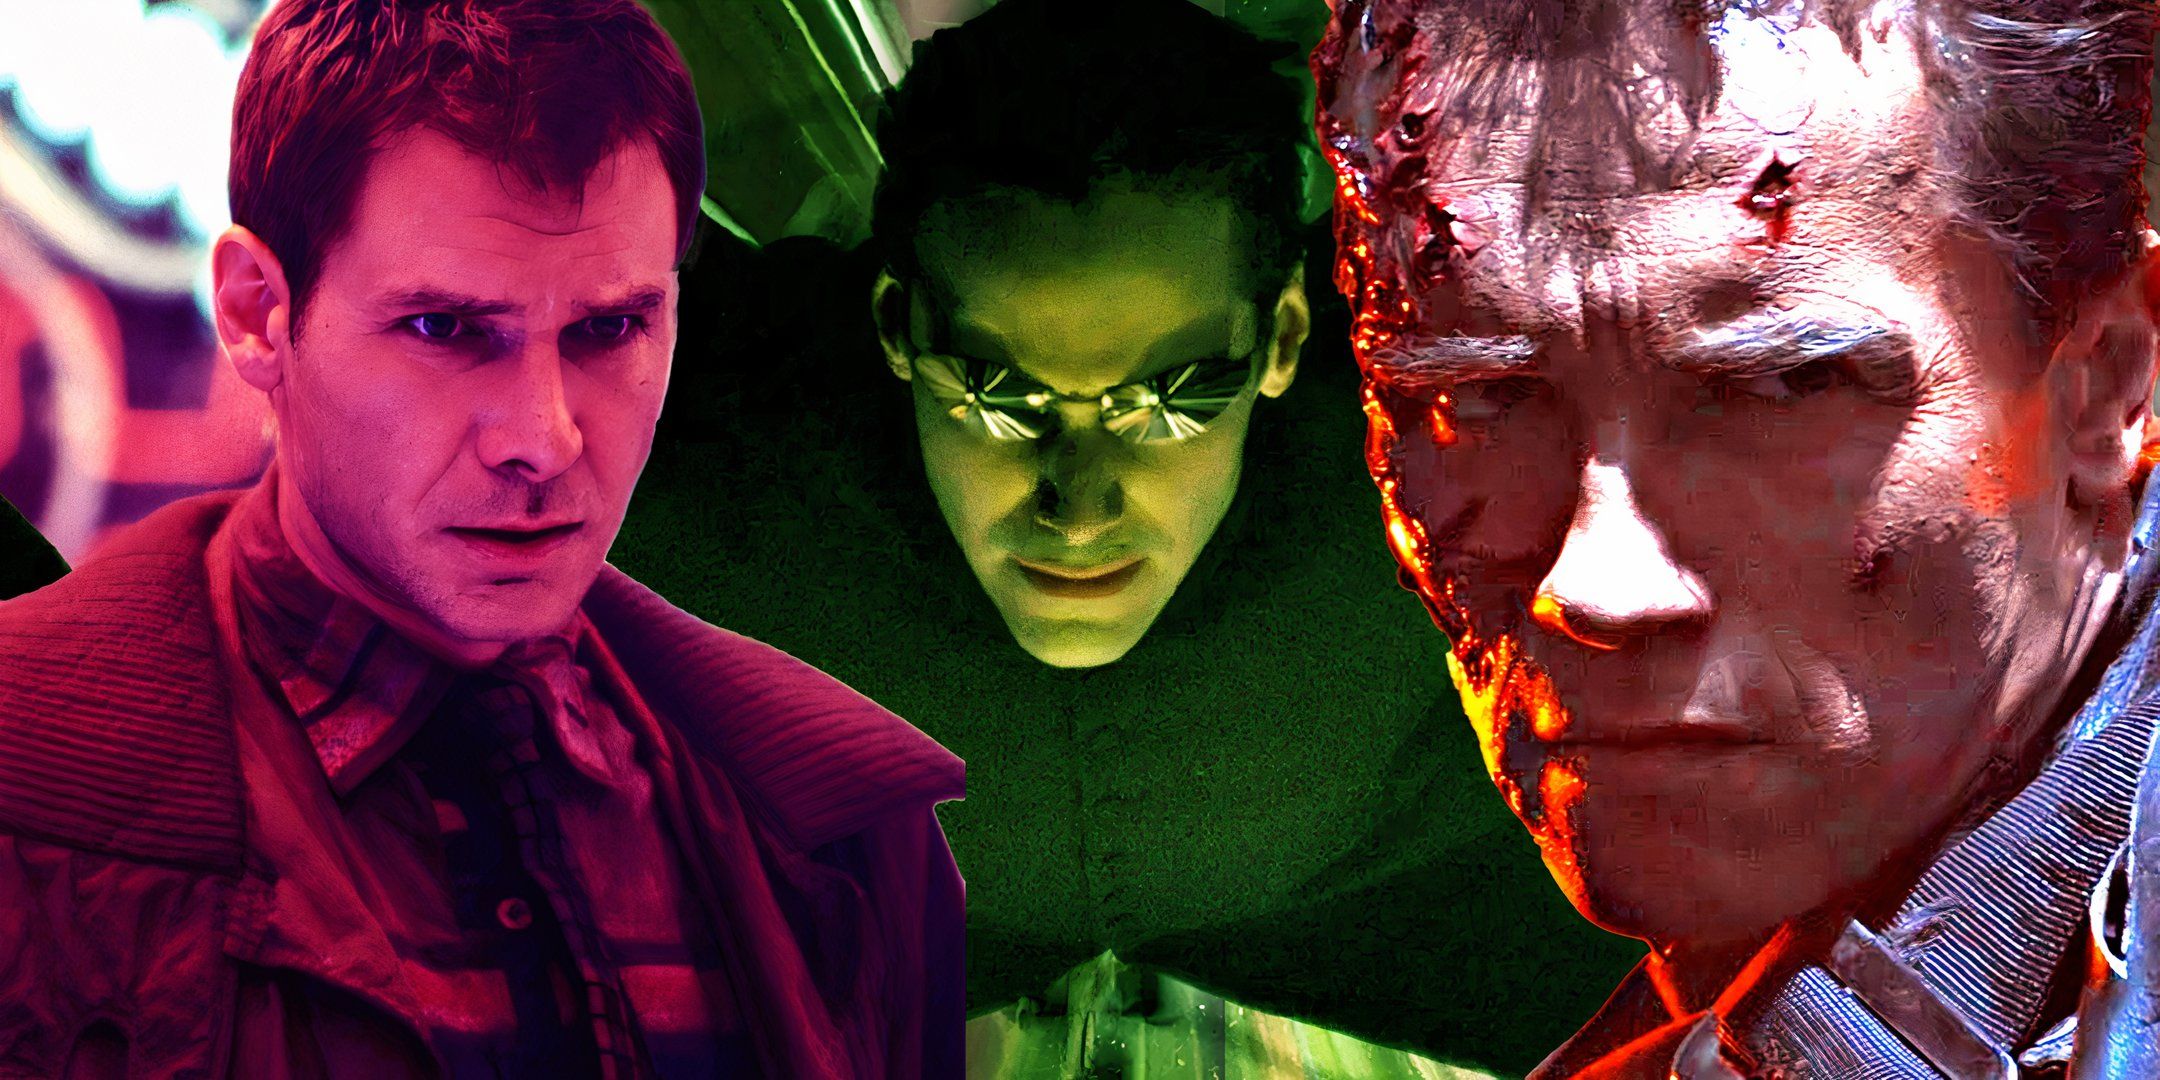 Harrison Ford in Blade Runner, Keanu Reeves in The Matrix and Arnold Schwarzenegger in Terminator 2 Judgement Day in Sci-Fi header